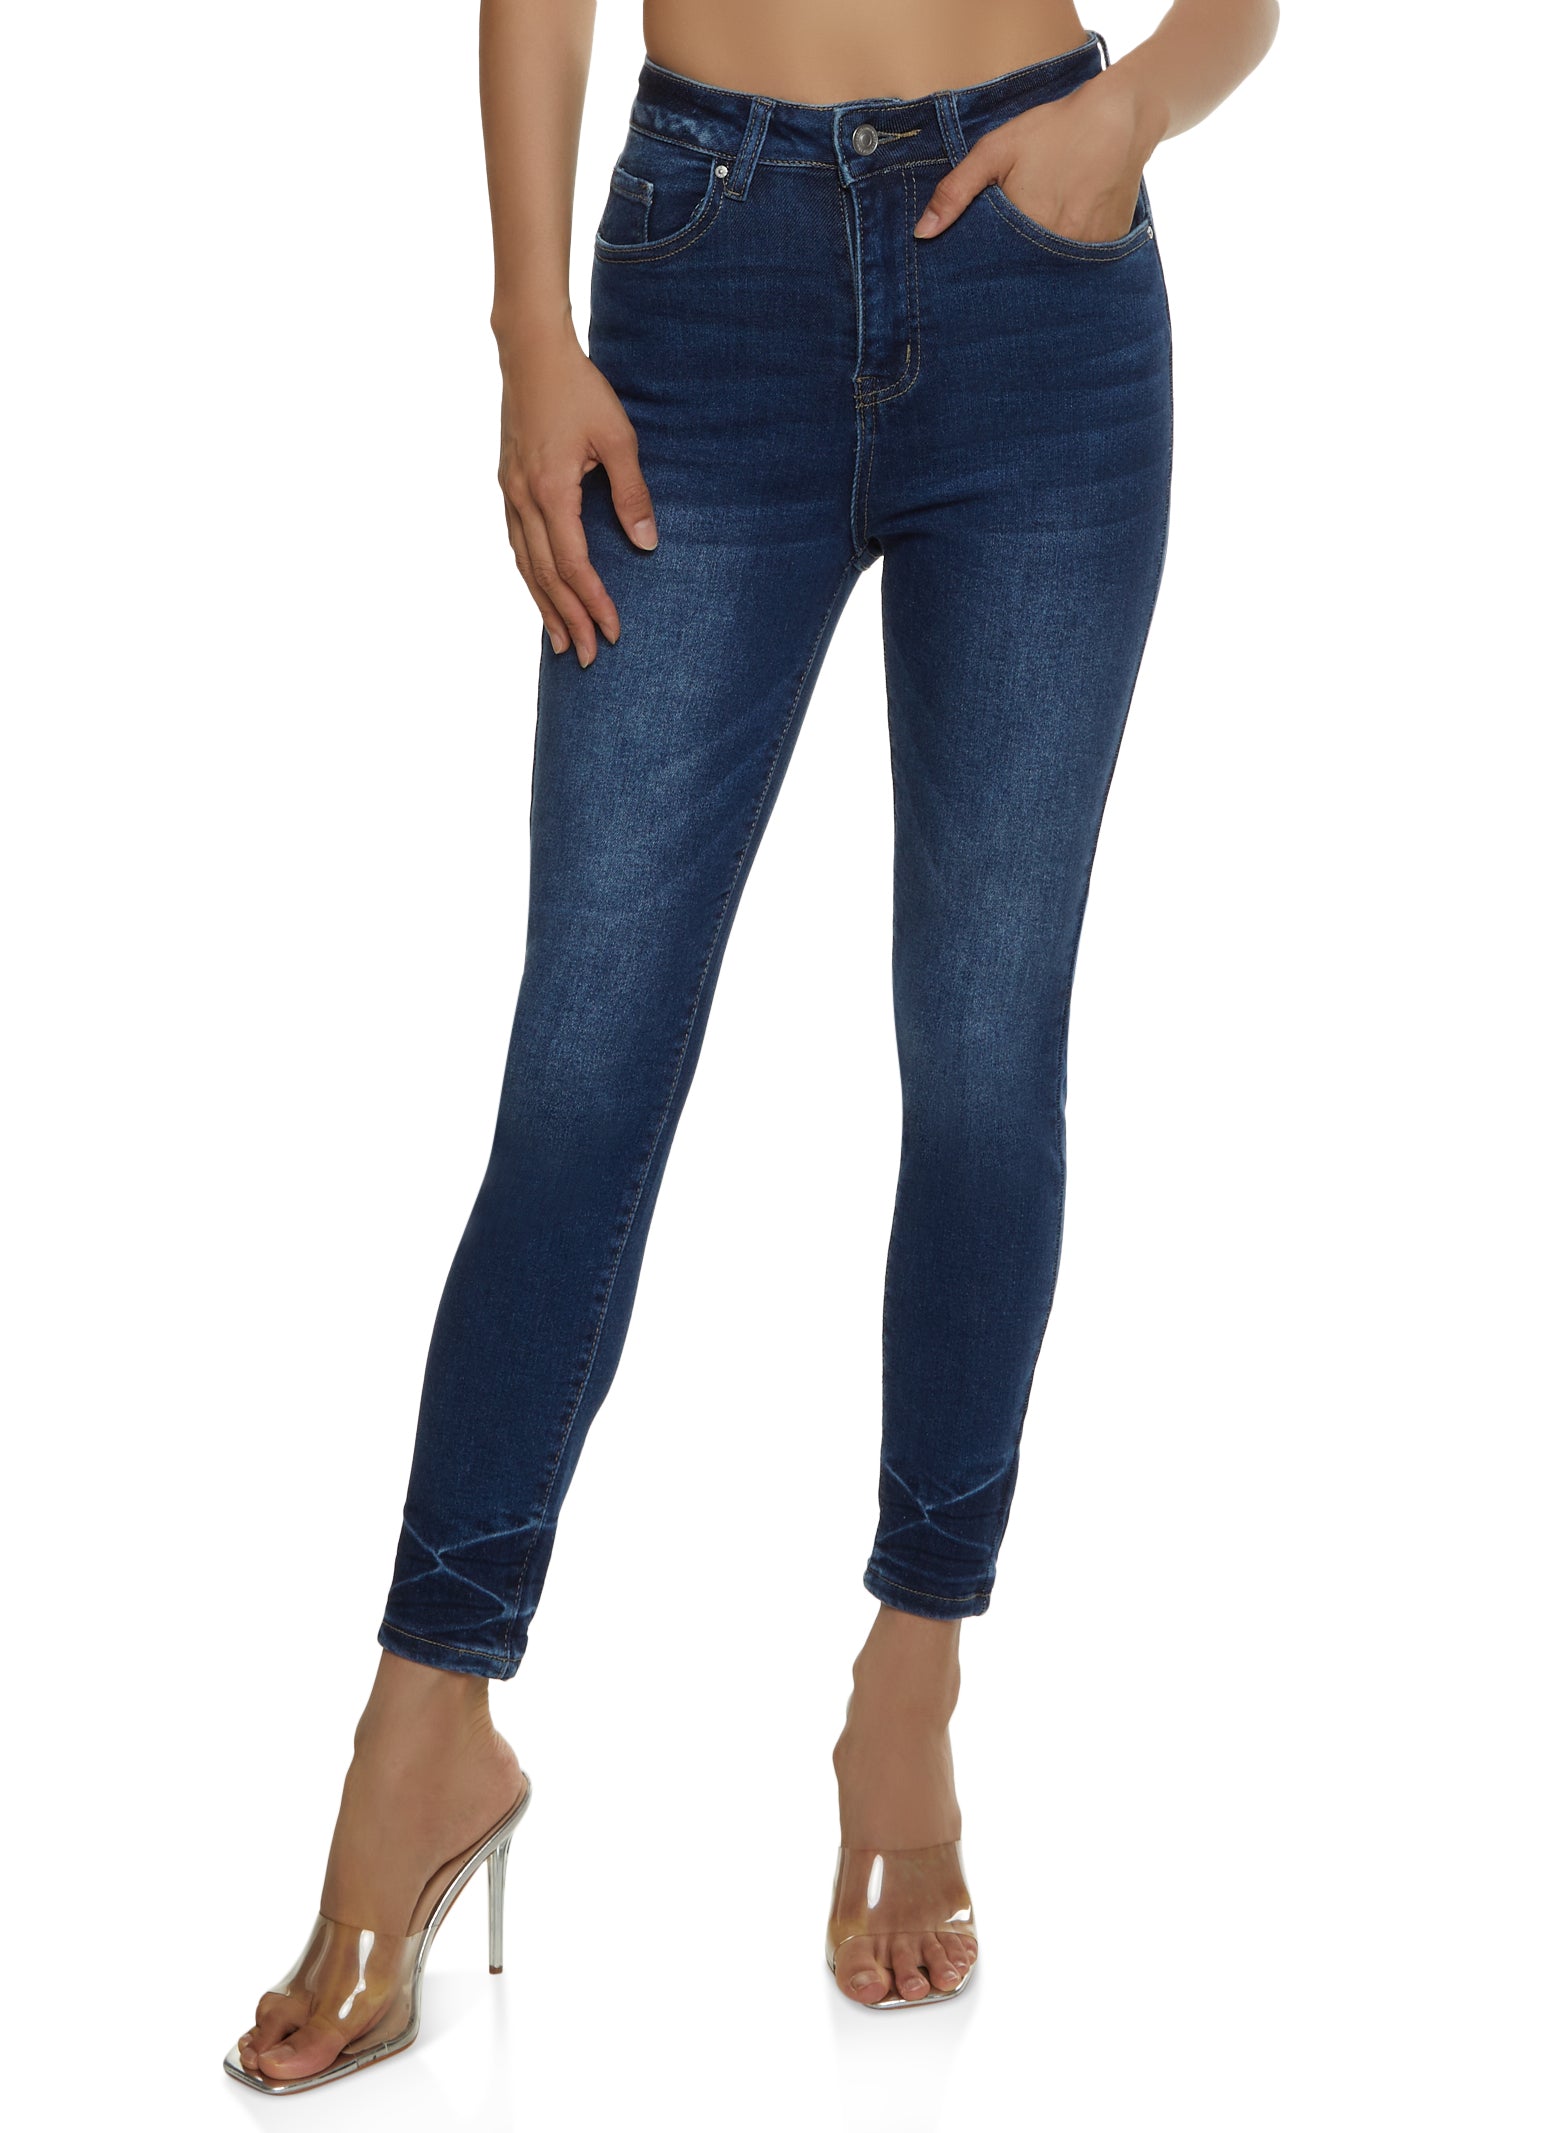 WAX Whiskered Skinny Jeans